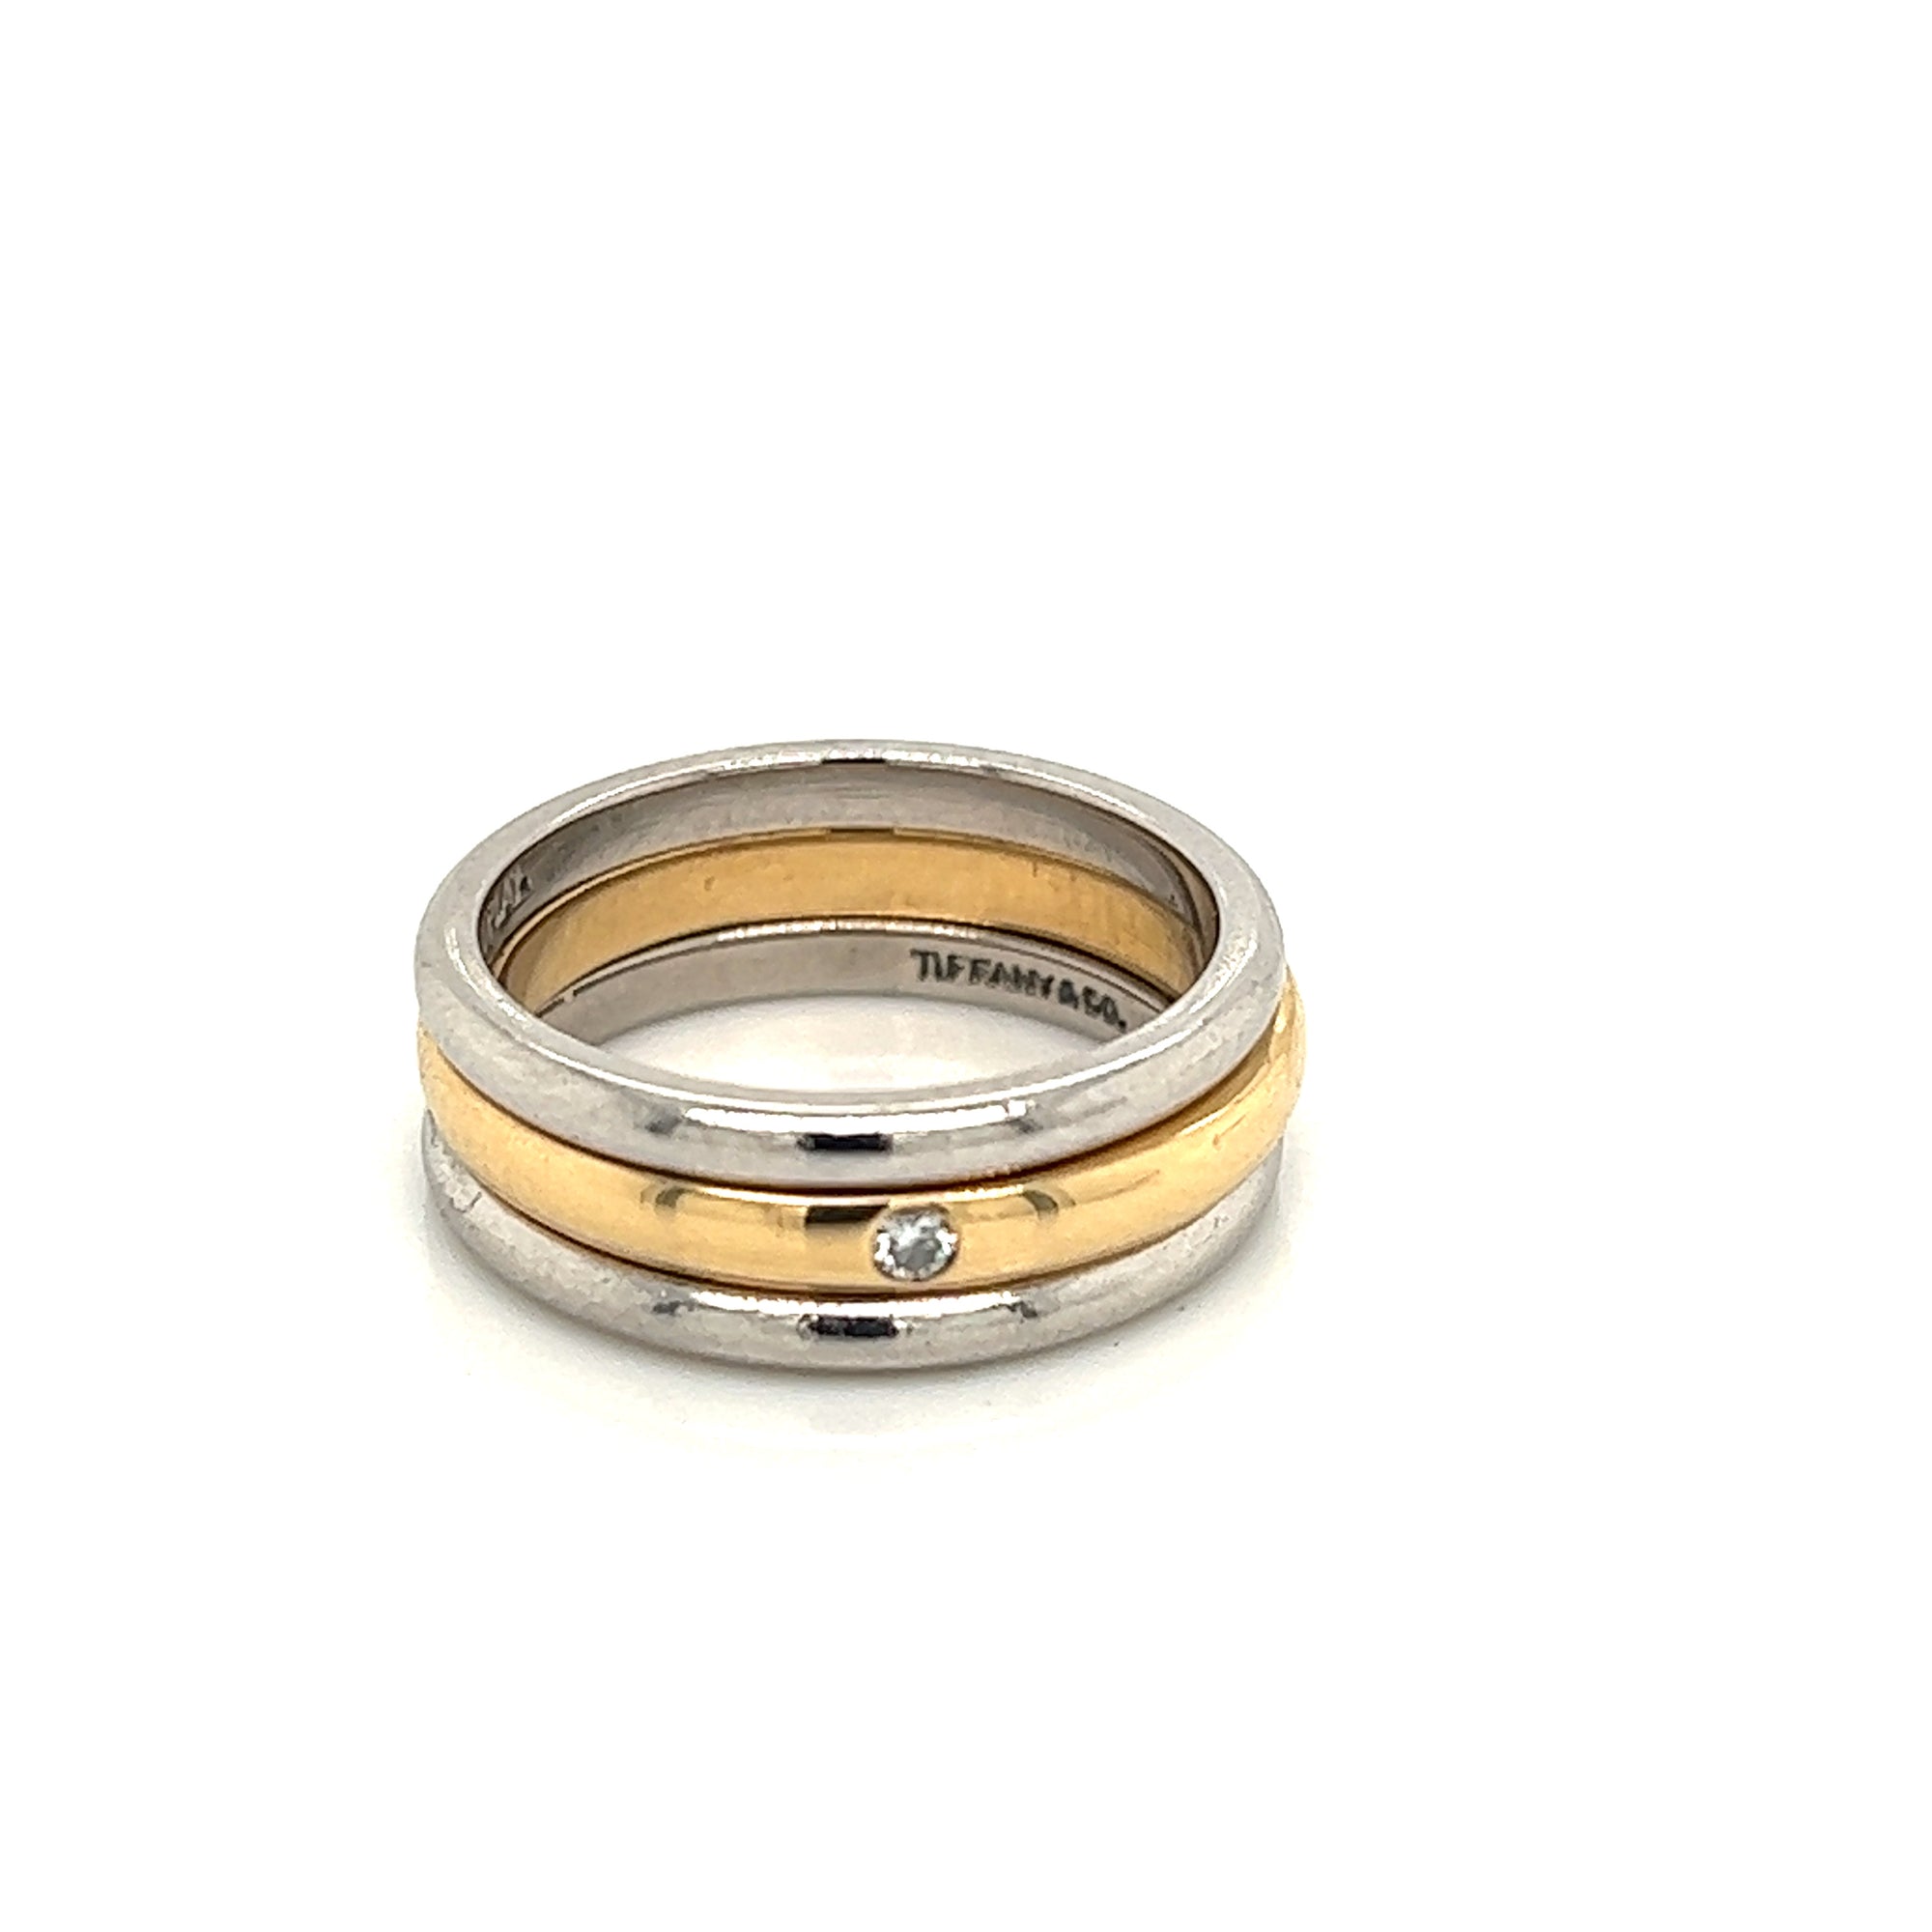 Tiffany & Co. Platinum & 18K Yellow Gold Stackable Rings